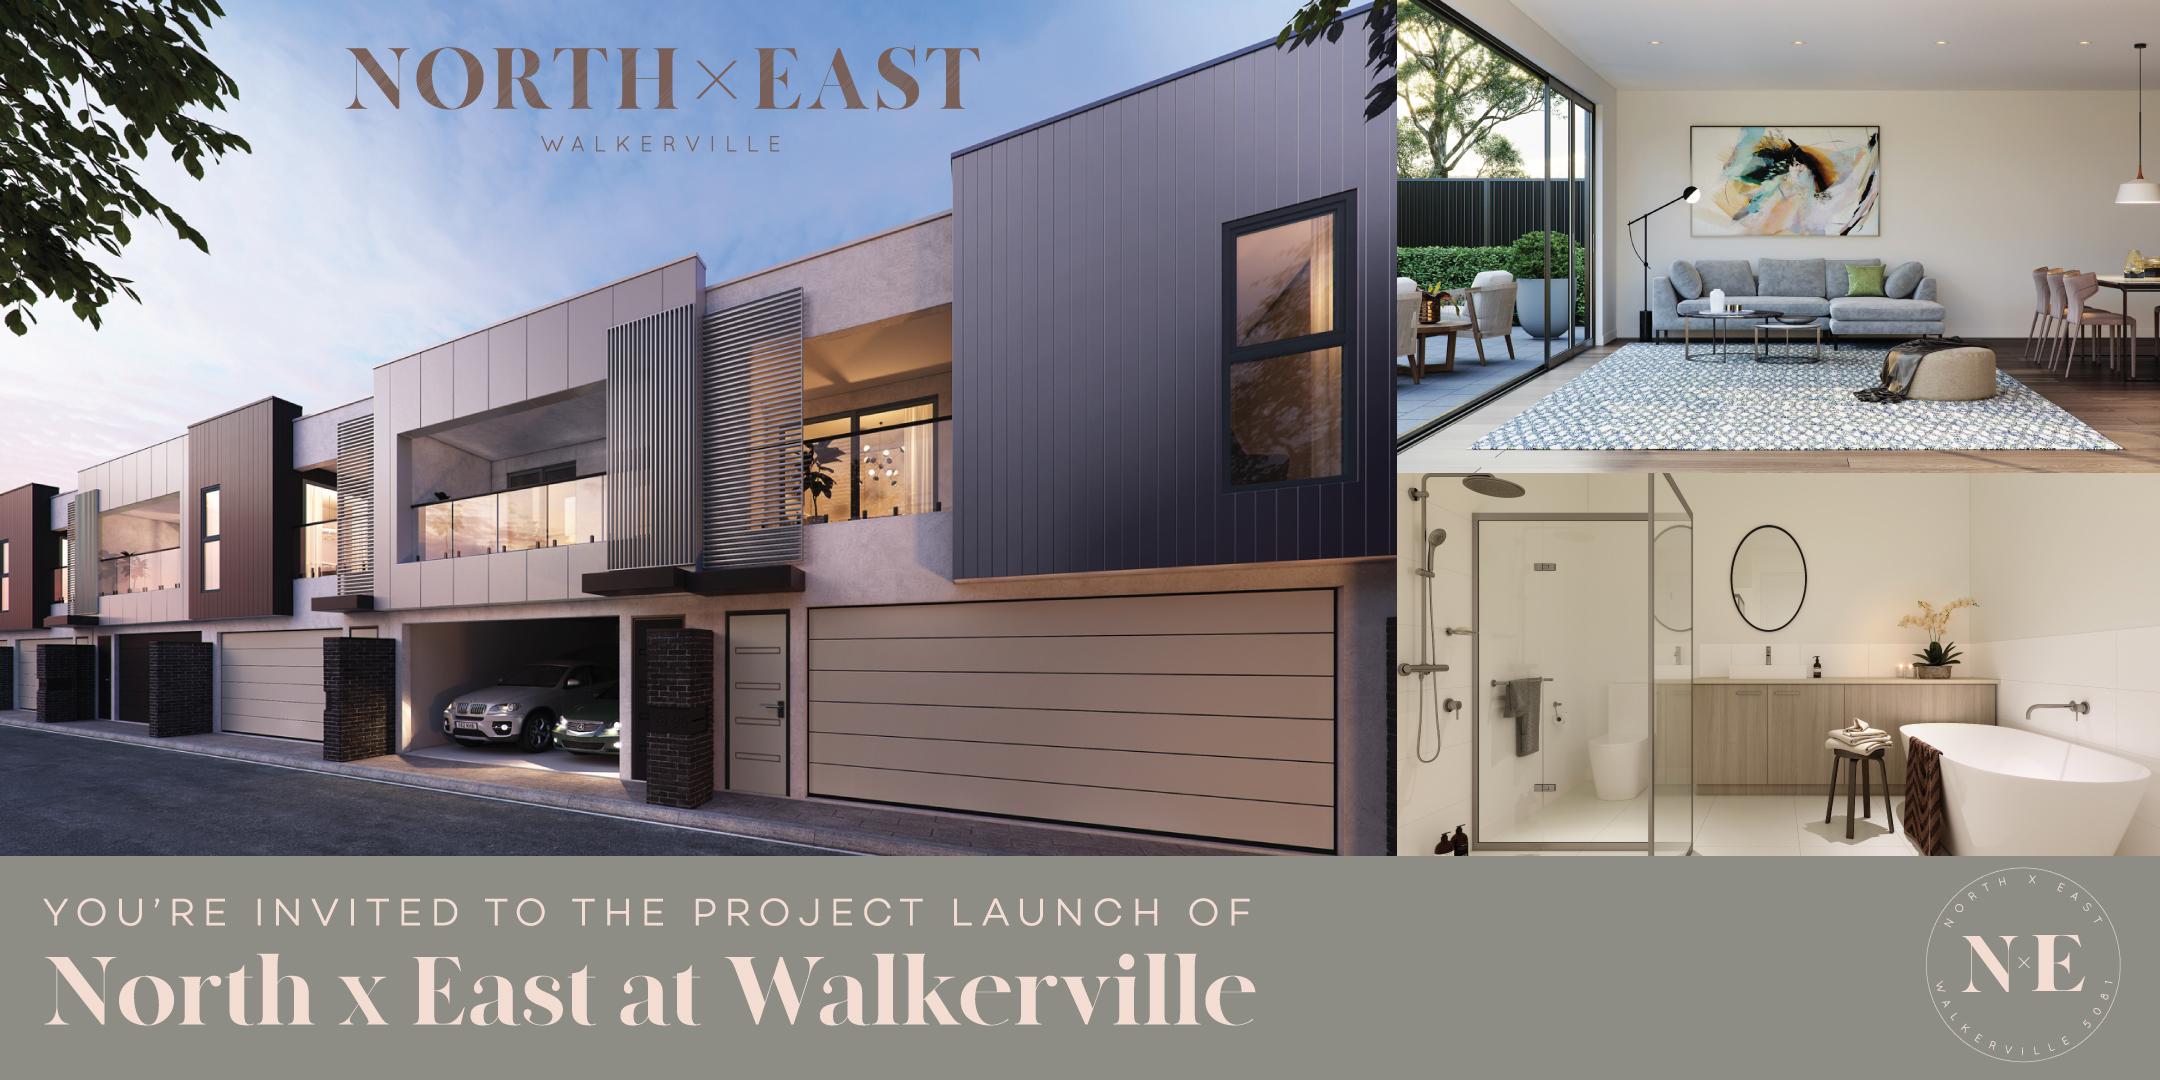 North X East At Walkerville Project Development Launch 19 Feb 2020